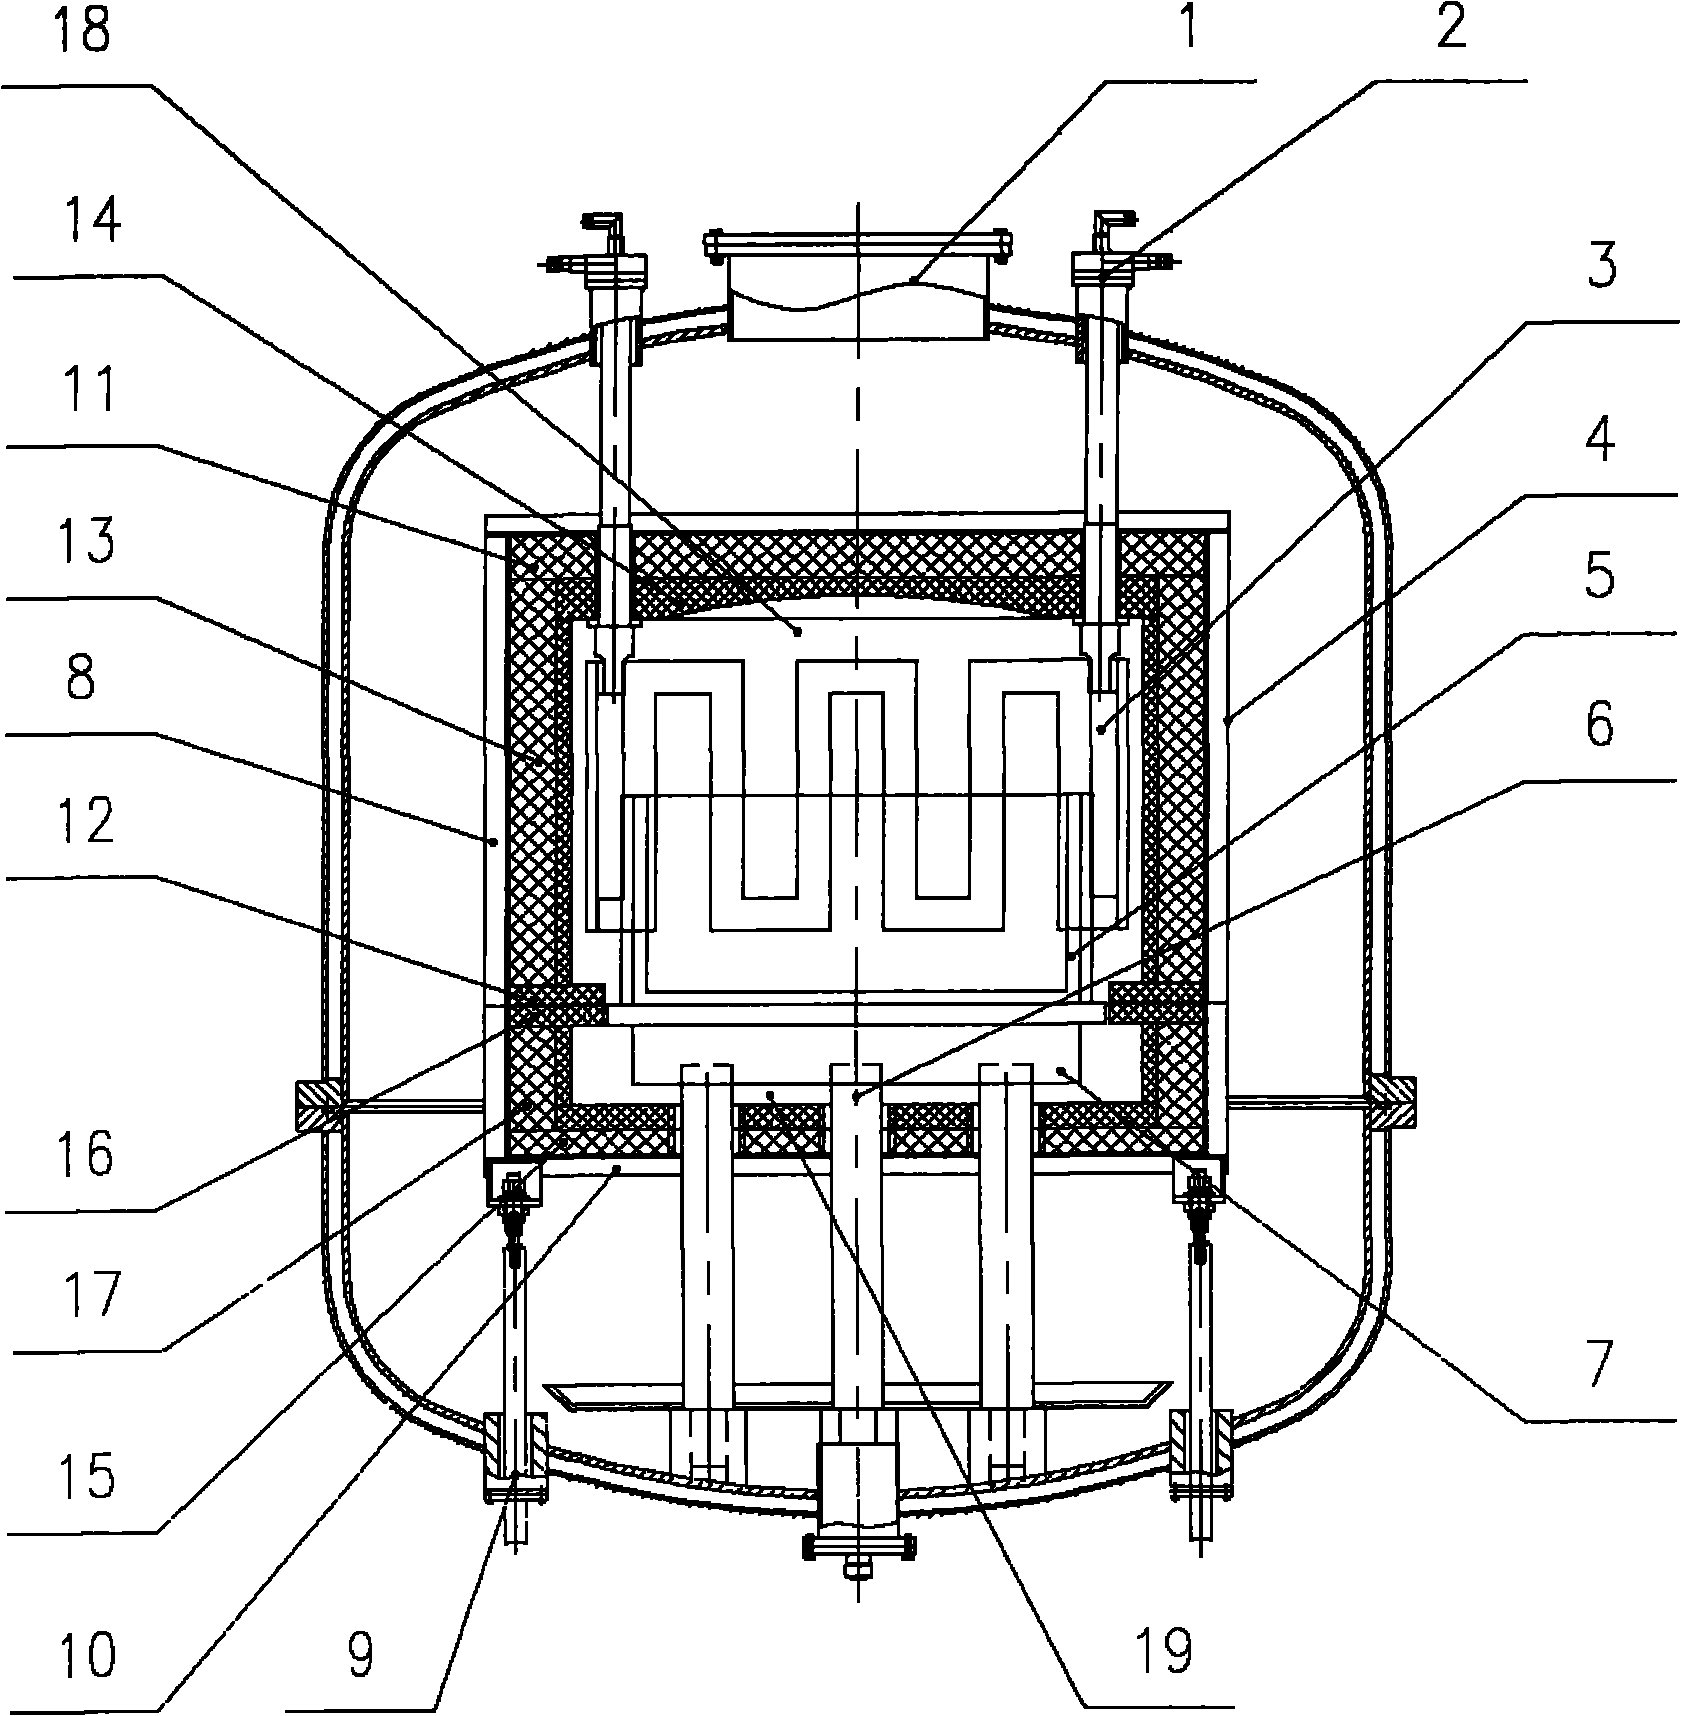 Crystalline silicon ingot furnace thermal field structure with two-stage thermal insulation cage